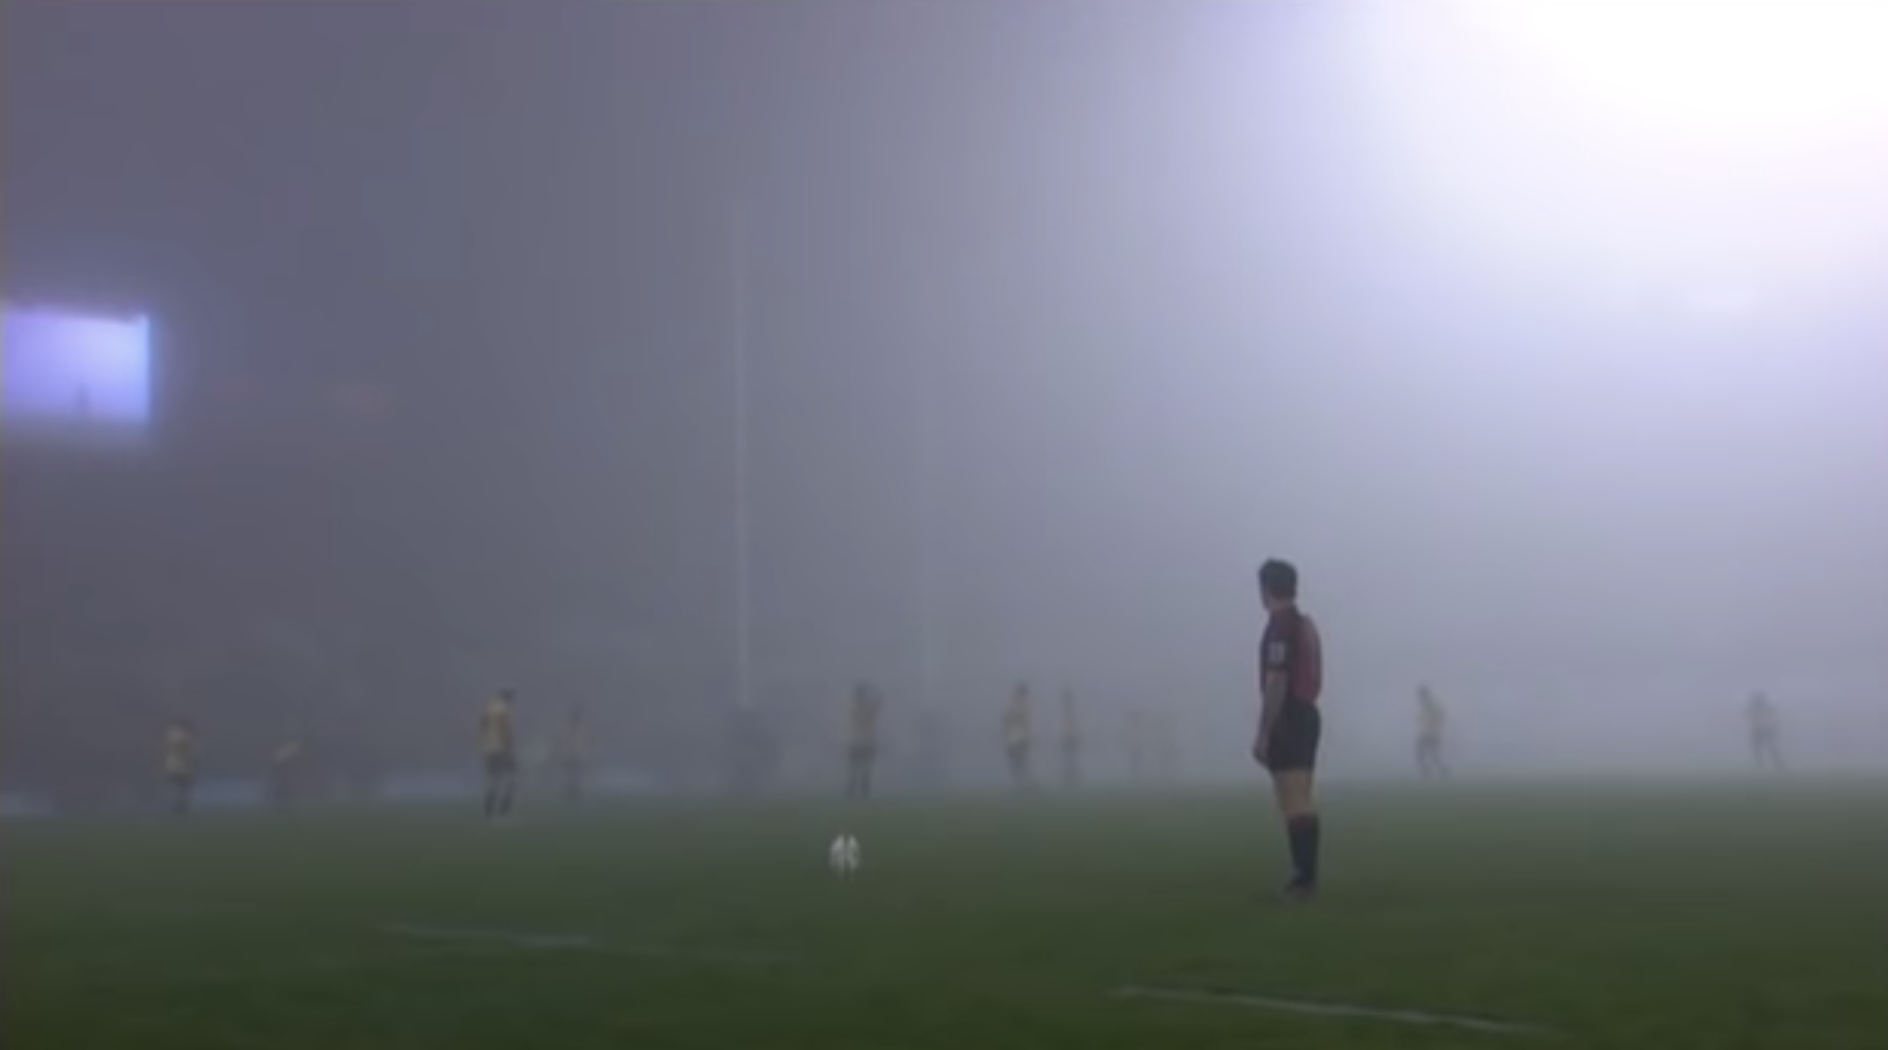 THROWBACK Surreal 2006 Super Rugby final where FOG makes match simply unwatchable Rugby Onslaught